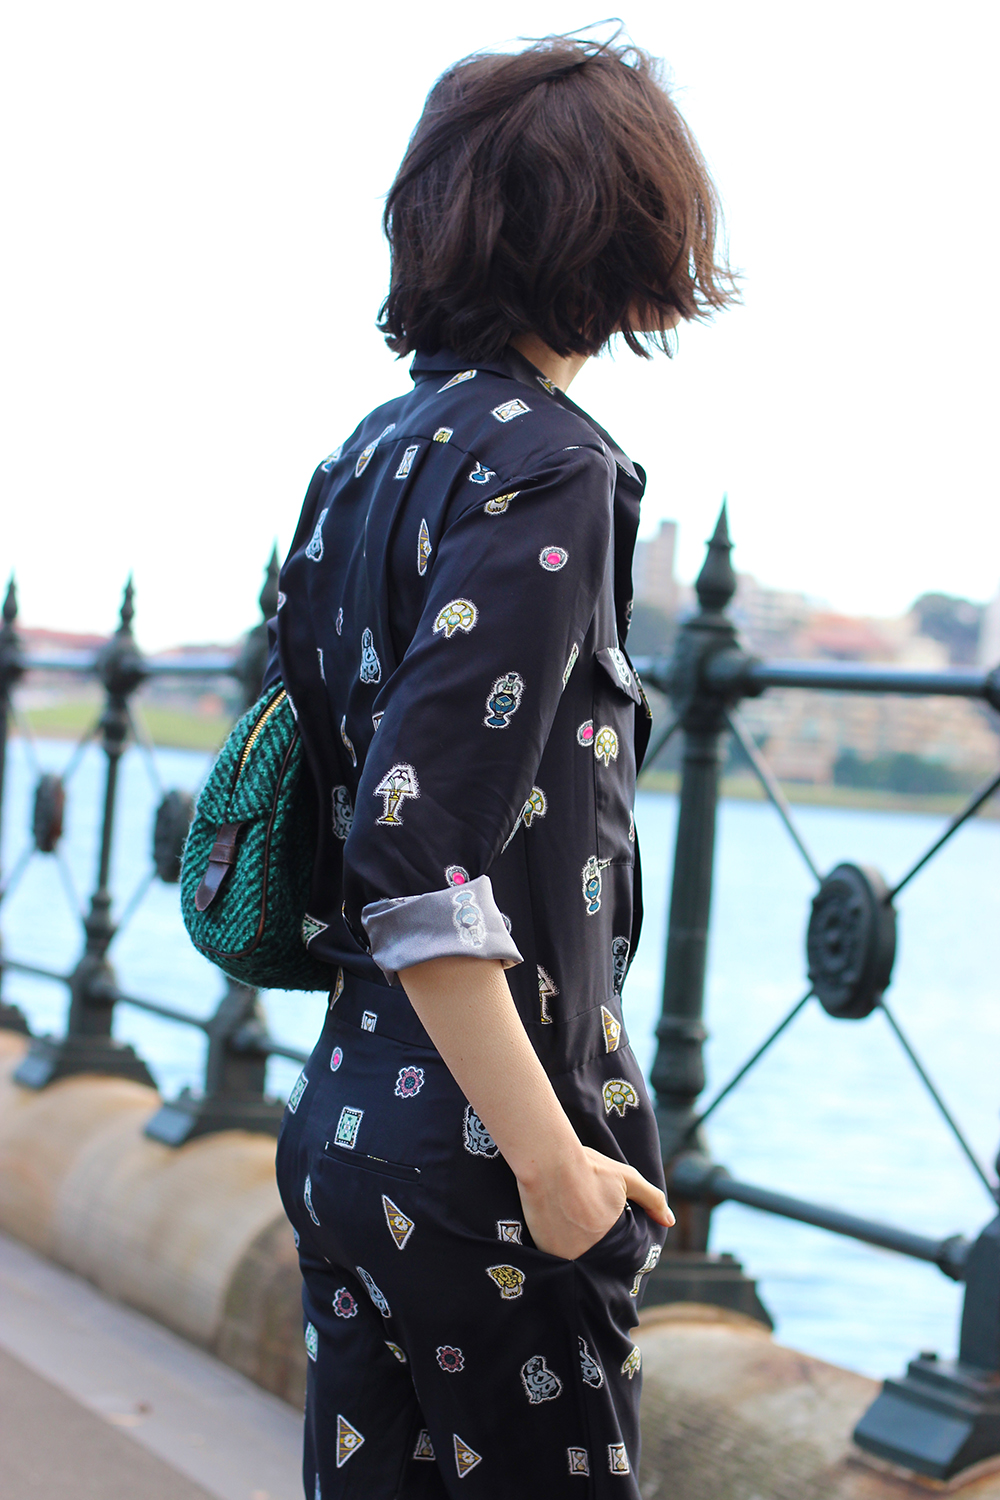 CHLOE C HILL FASHION BLOG | Wearing Issa london printed jumpsuit from the outnet at Dawes Point on Sydney Harbour